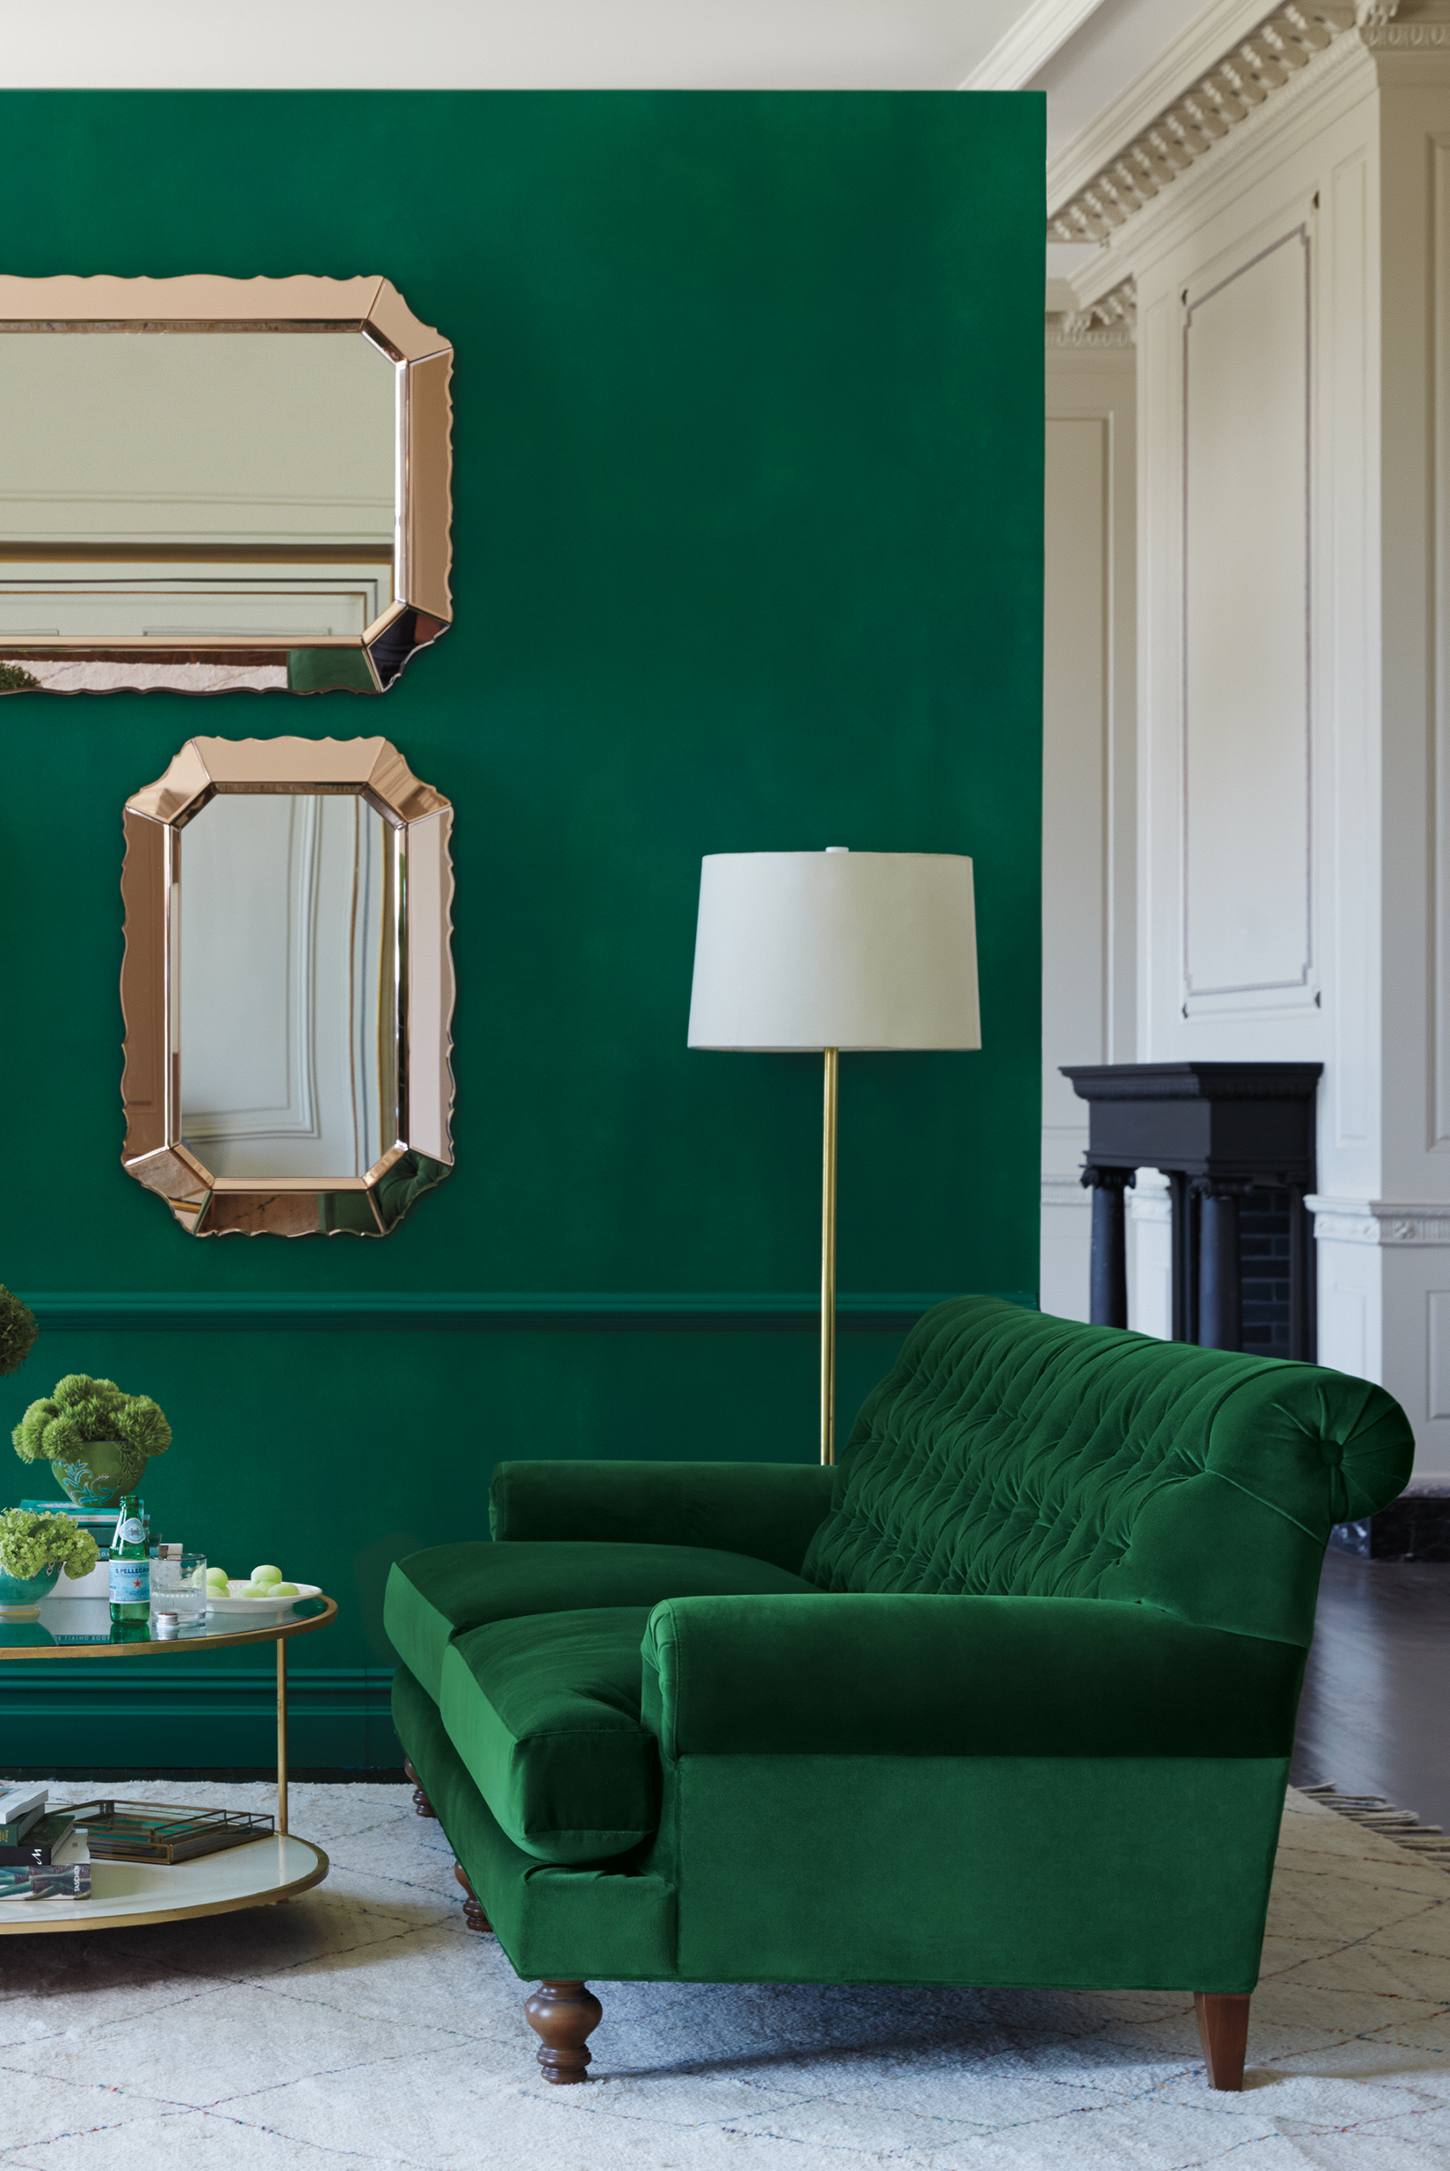 Jewel Tone Interiors That Show You How To Implement This